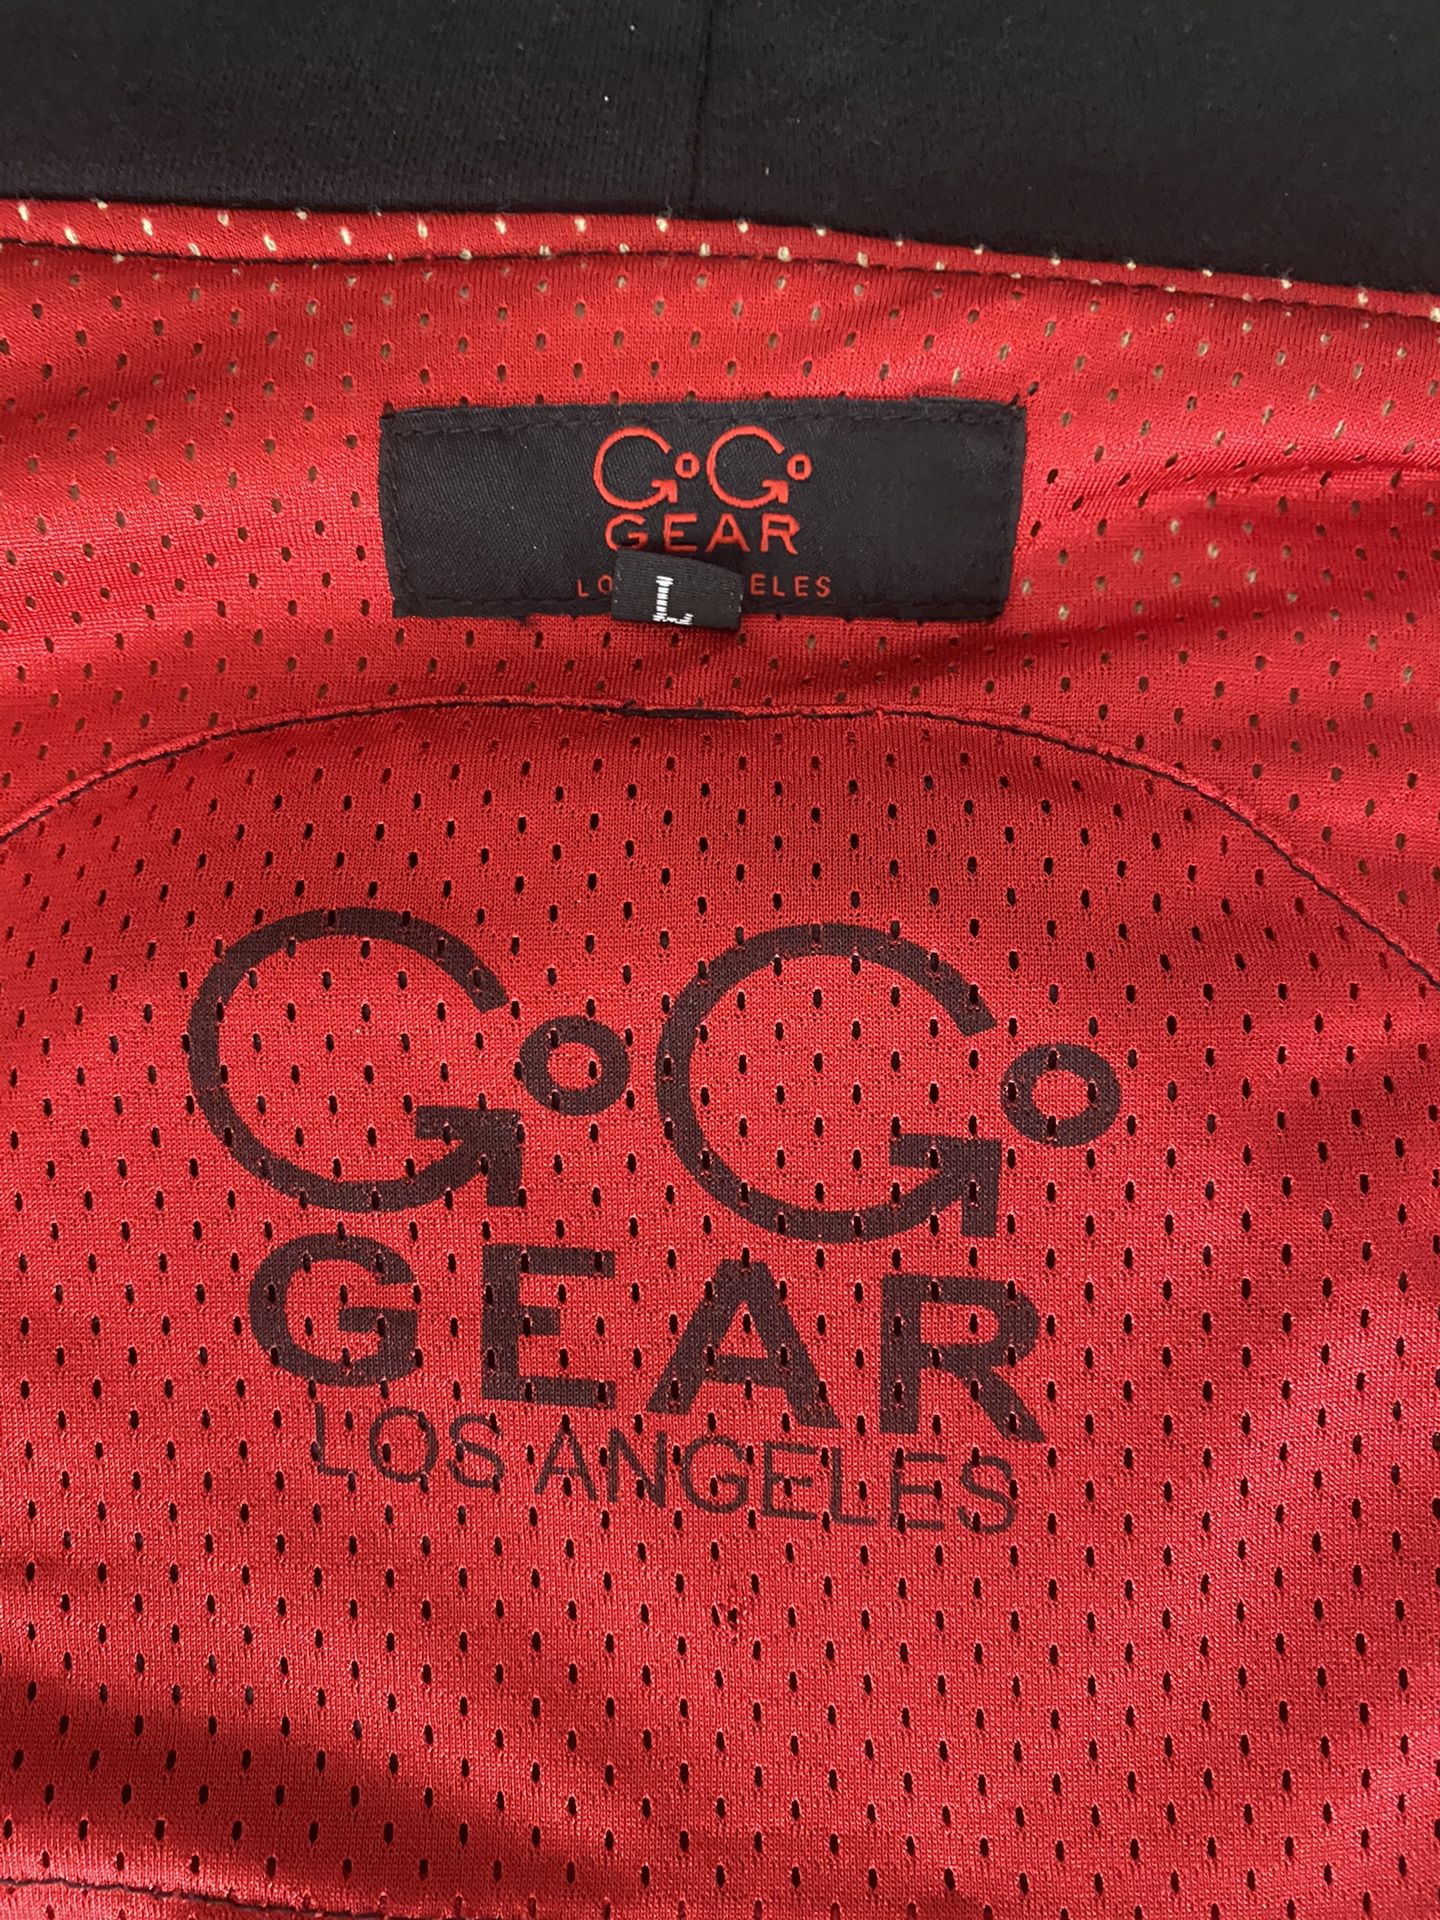 GoGo Gear Motorcycle Riding Hoodie